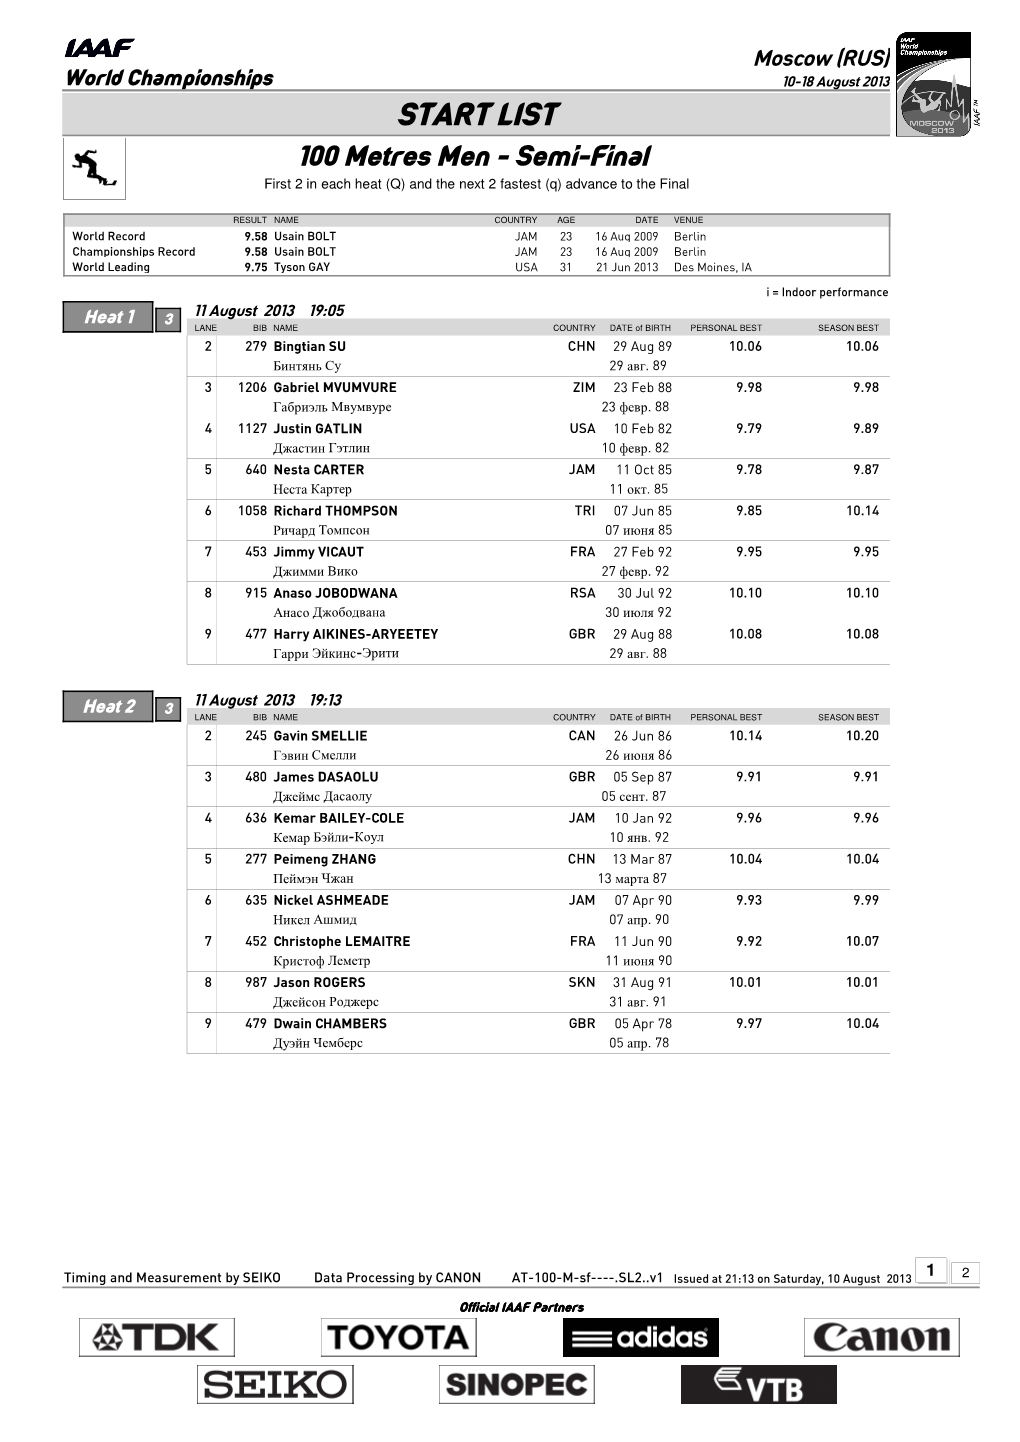 START LIST 100 Metres Men - Semi-Final First 2 in Each Heat (Q) and the Next 2 Fastest (Q) Advance to the Final